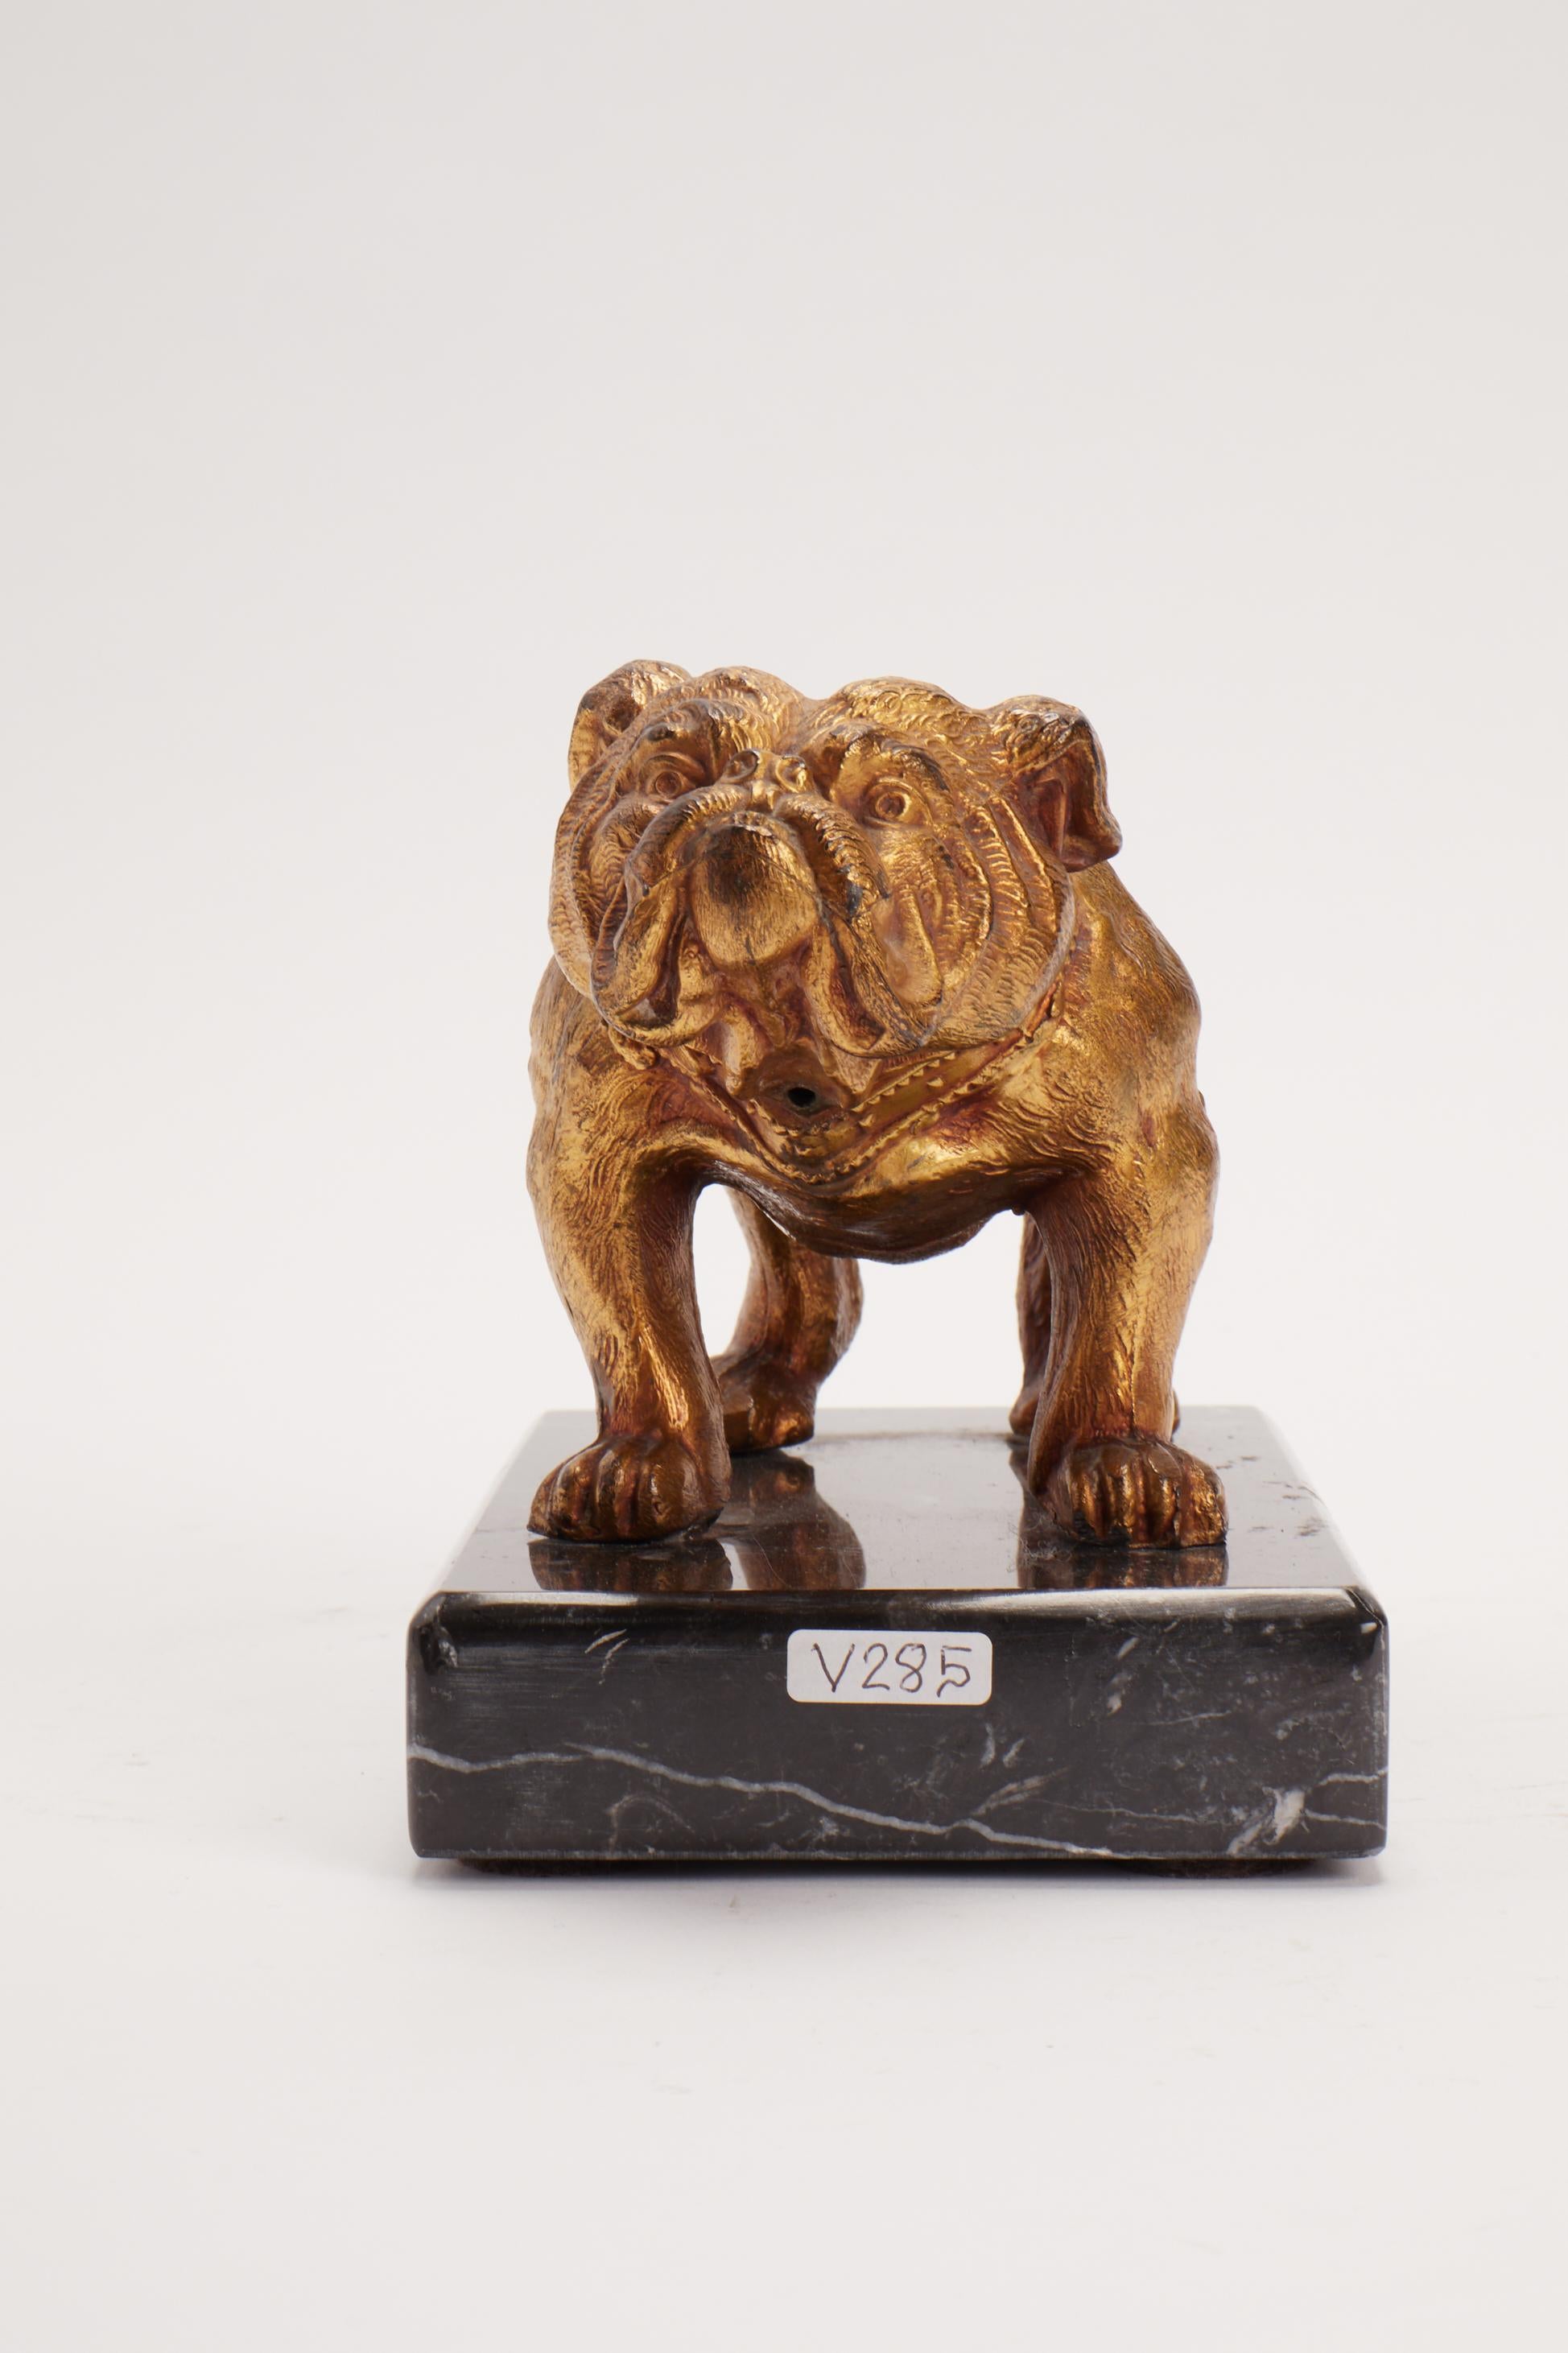 American Bulldog dog sculpture signed J.B. Made in America late 19th century.  For Sale